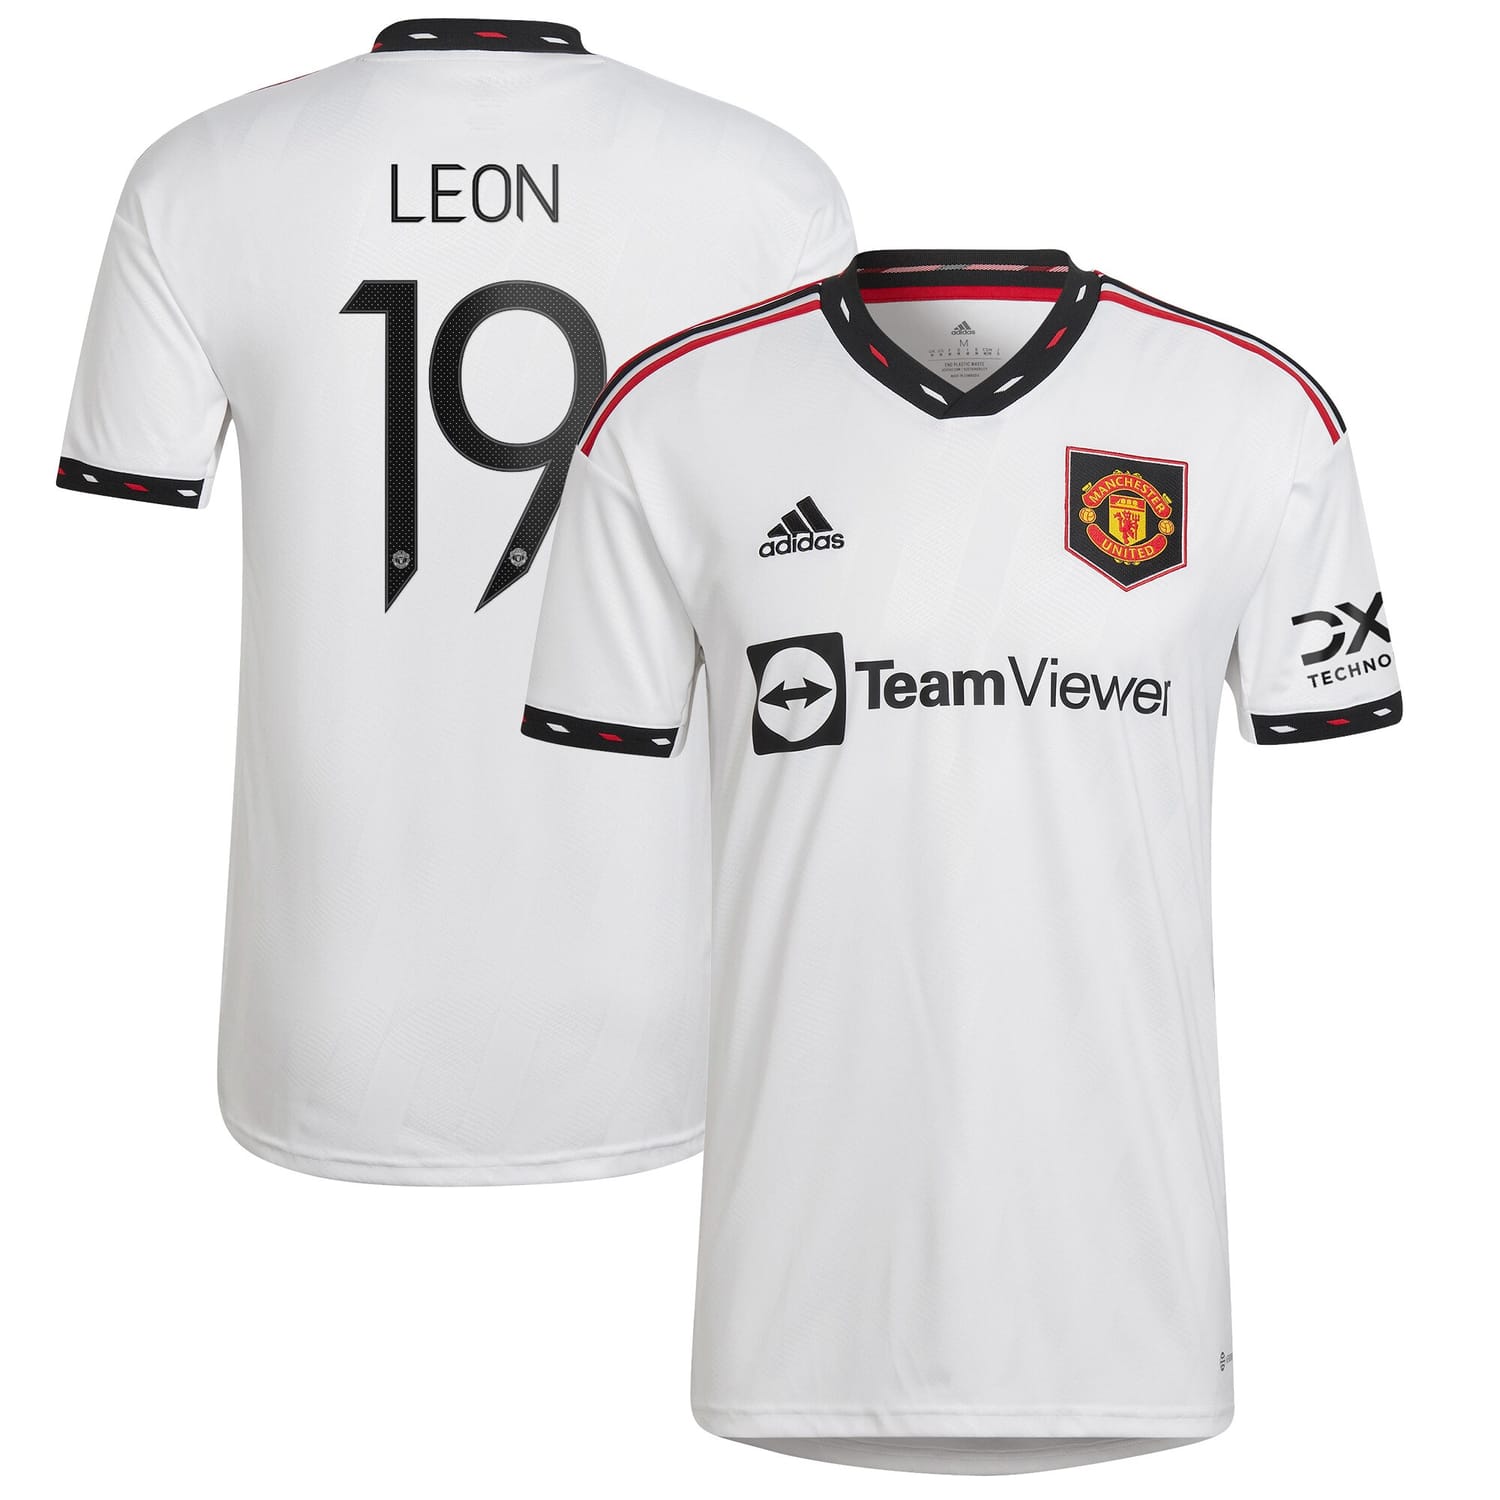 Premier League Manchester United Away Cup Jersey Shirt 2022-23 player Adriana Leon 19 printing for Men